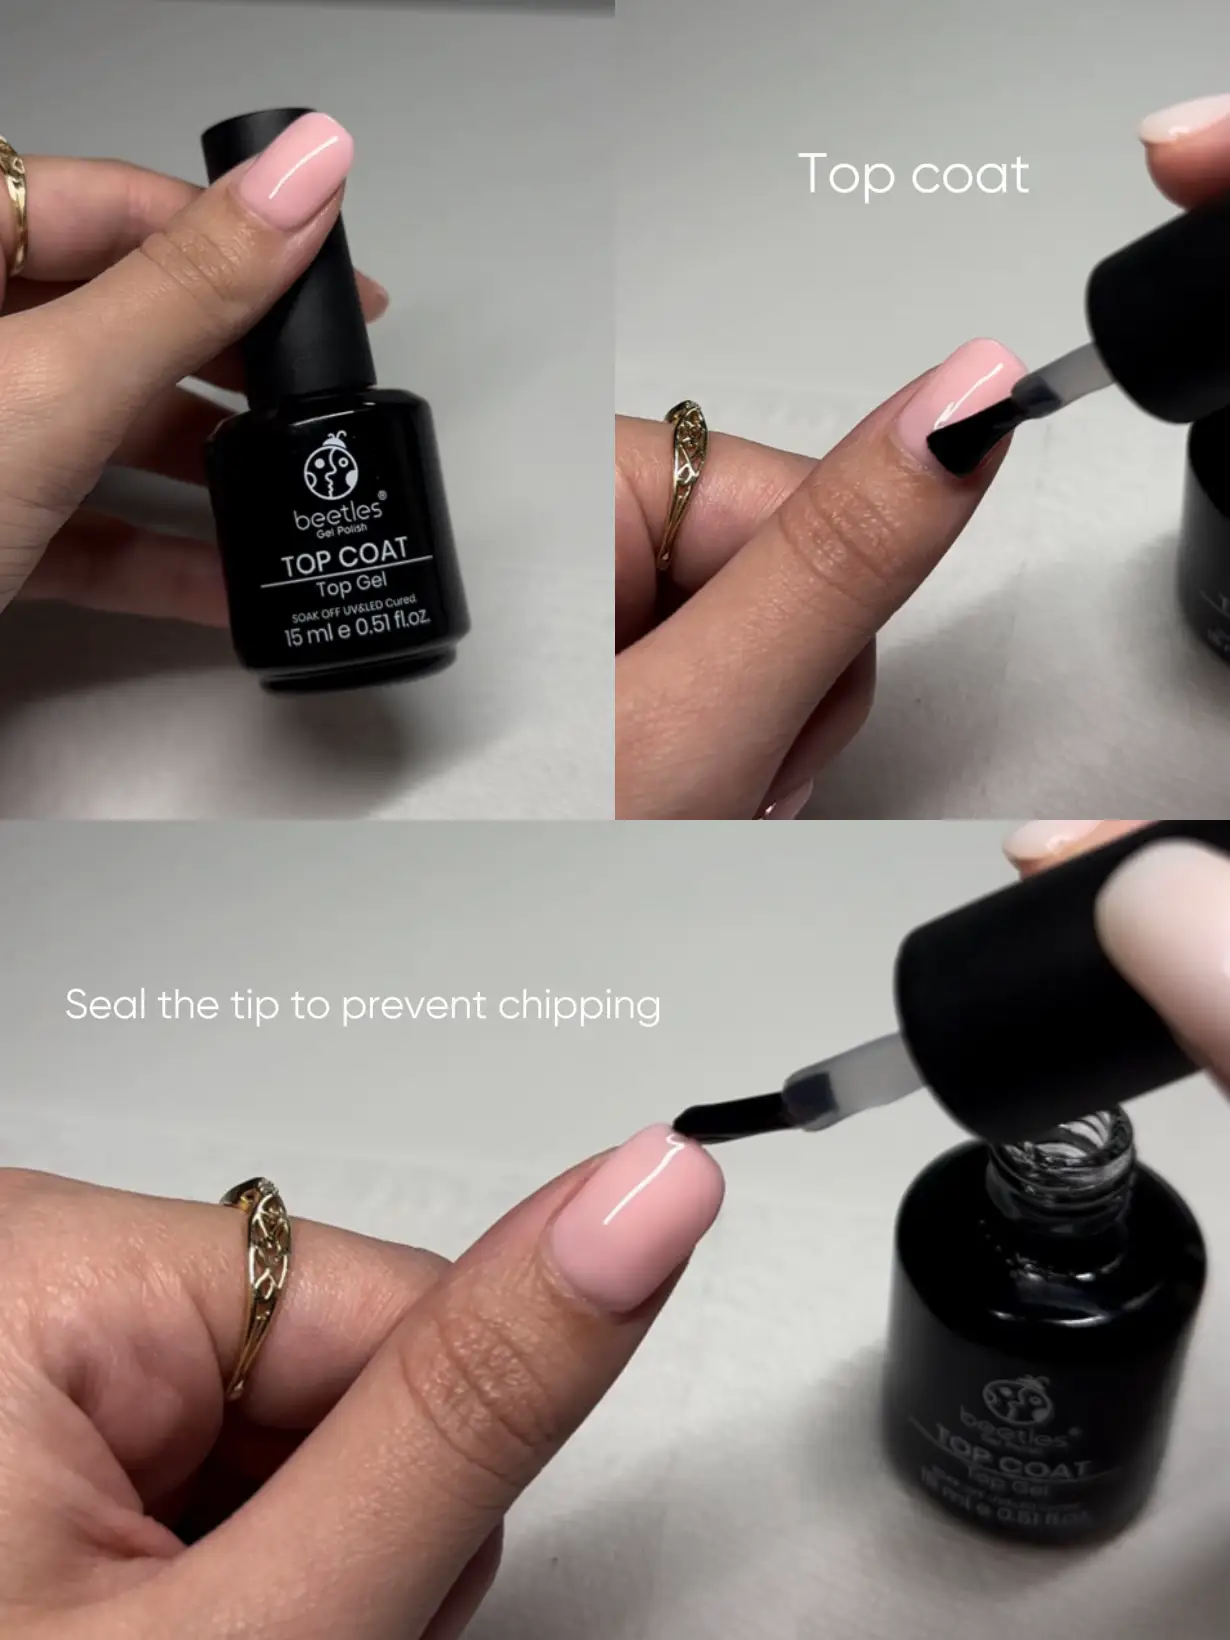 Not Polish Nail Forms: Perfectly Sculpted Nails Every Time – Notpolish Inc